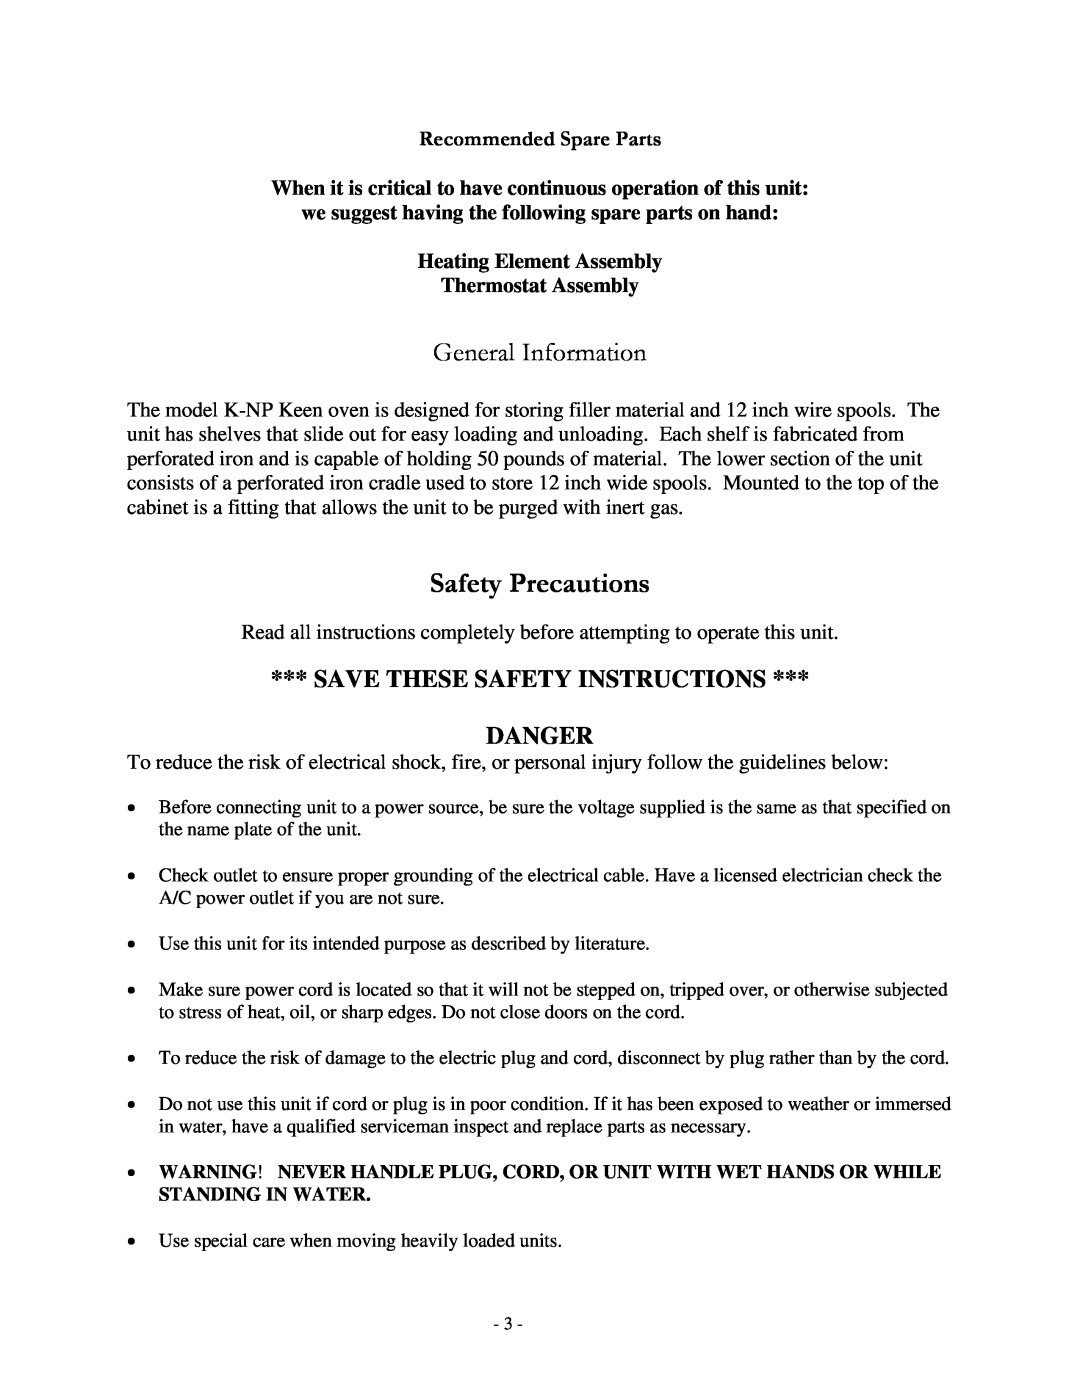 Henkel K-NP manual Safety Precautions, General Information, Save These Safety Instructions Danger, Recommended Spare Parts 